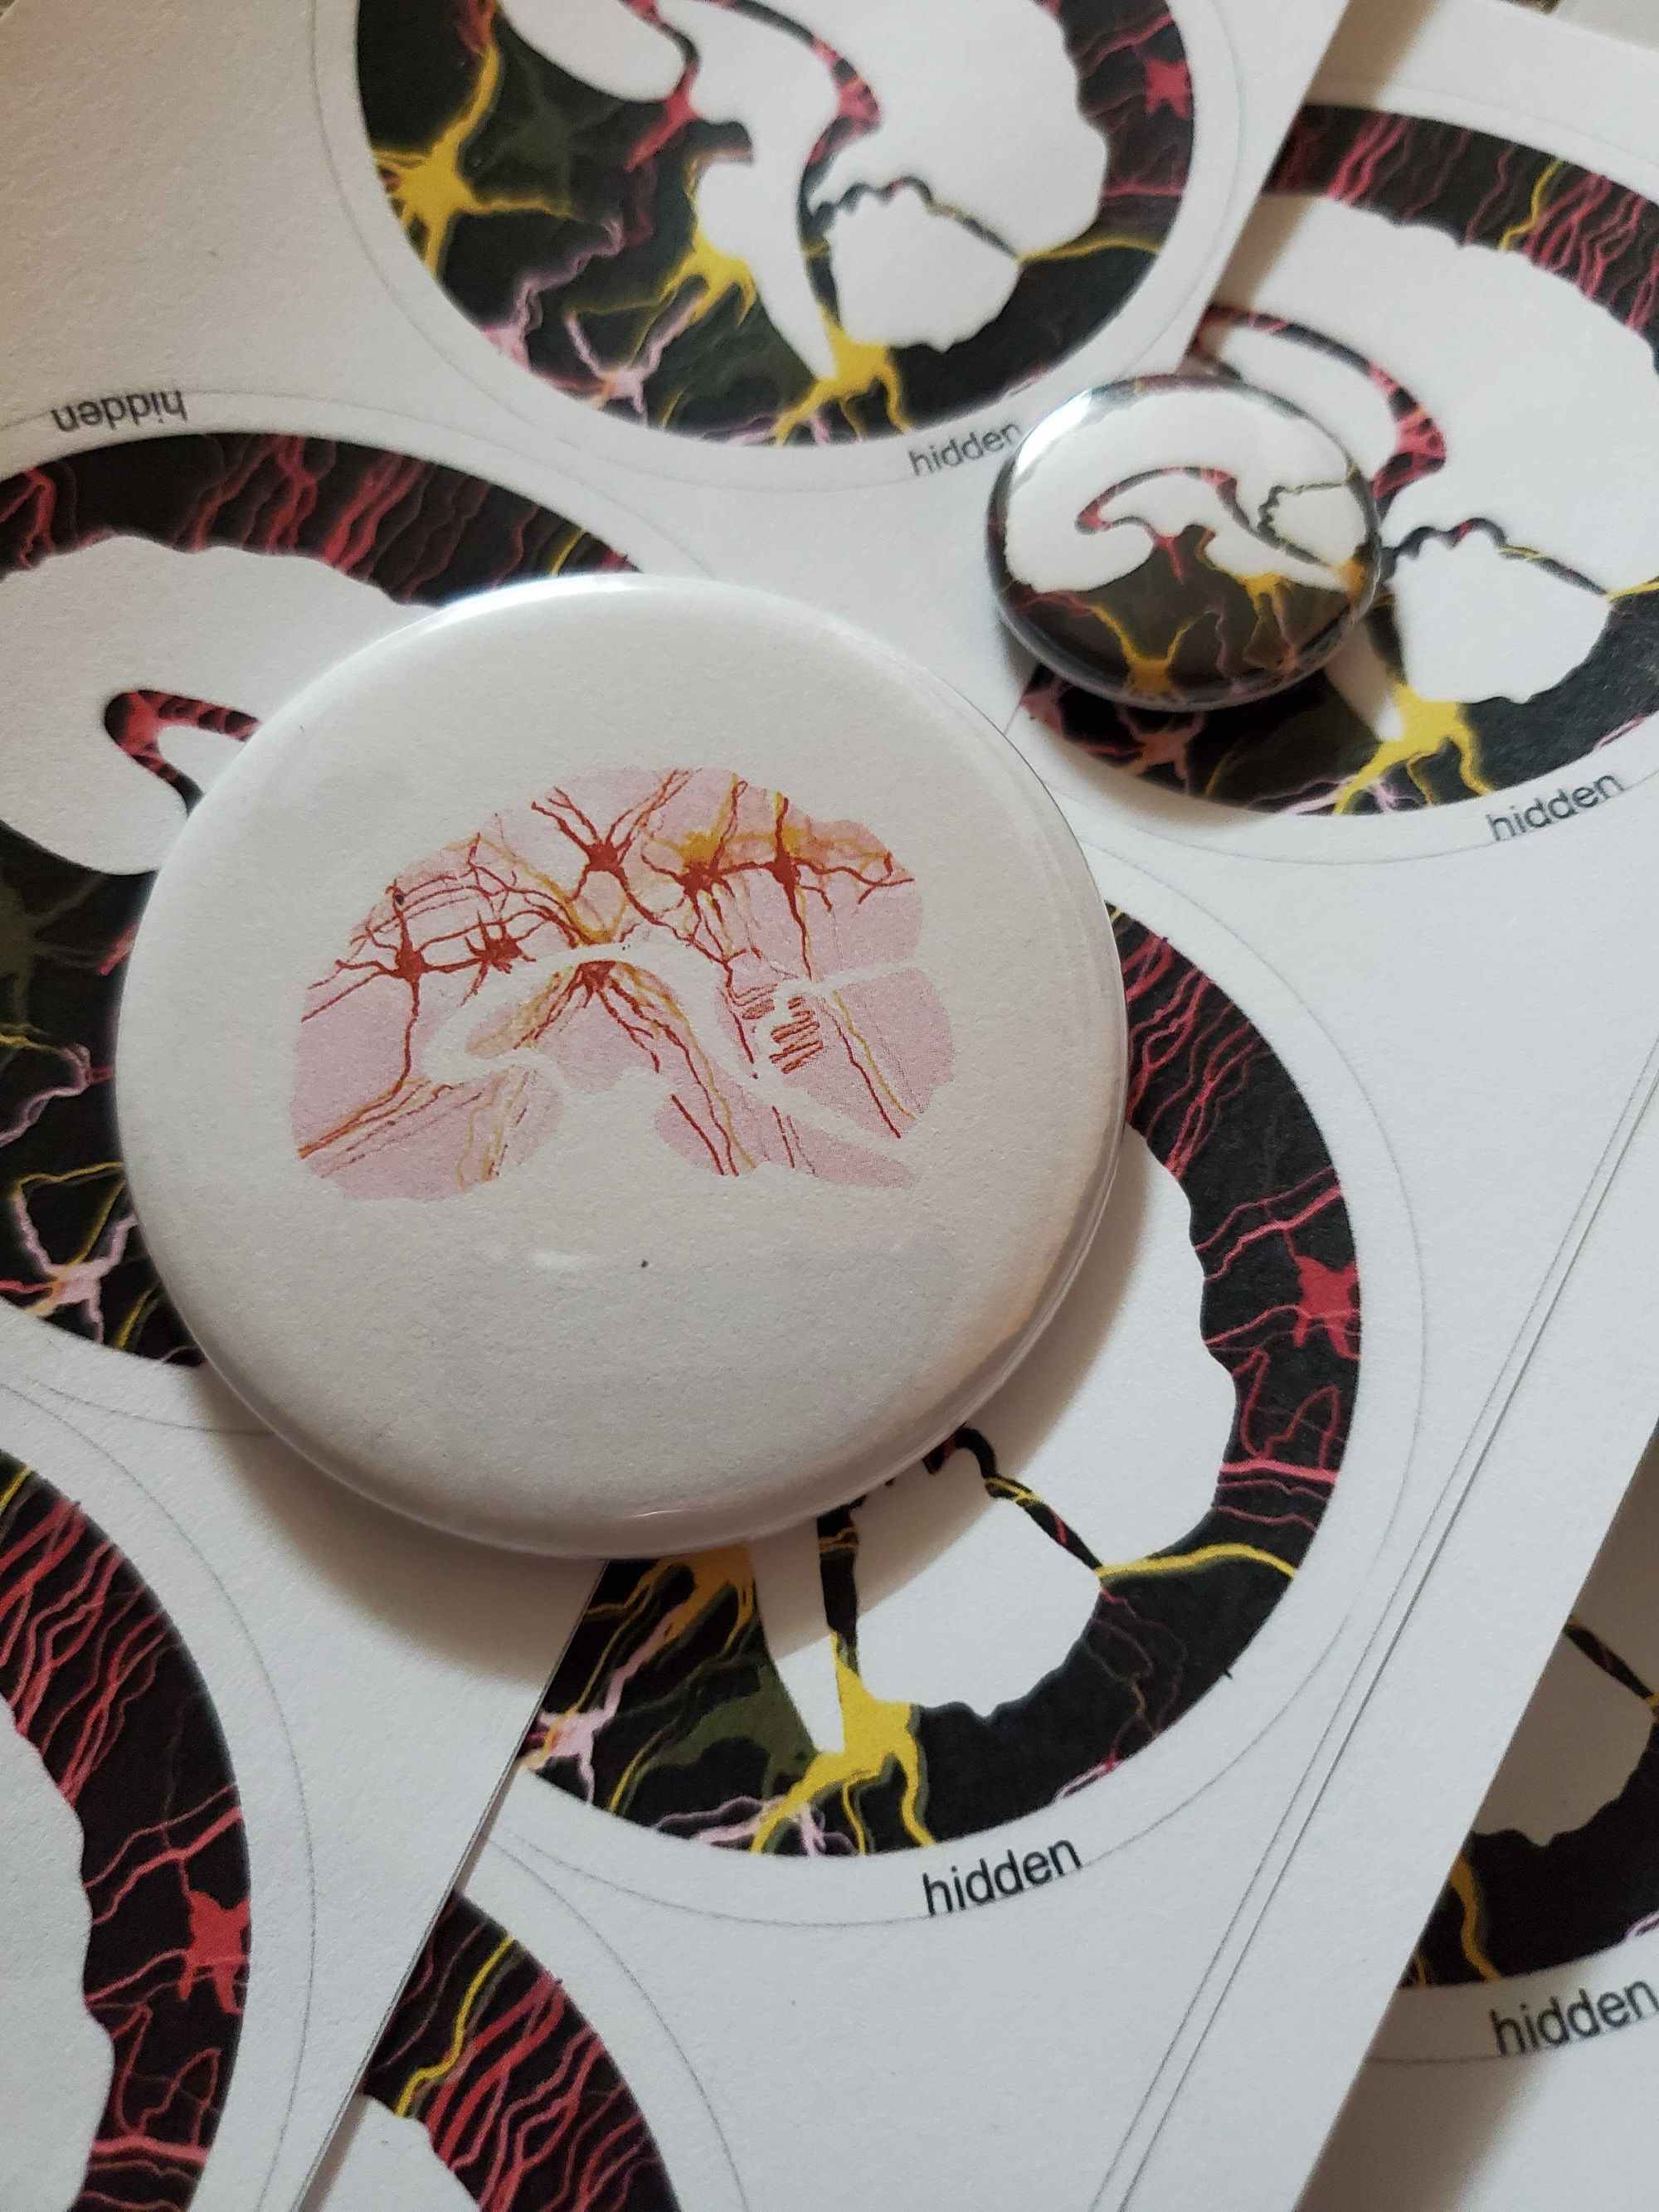 A circular white button pin with a pink brain on it lays on top of pages of circular EWN stickers with white brains on black backgrounds.